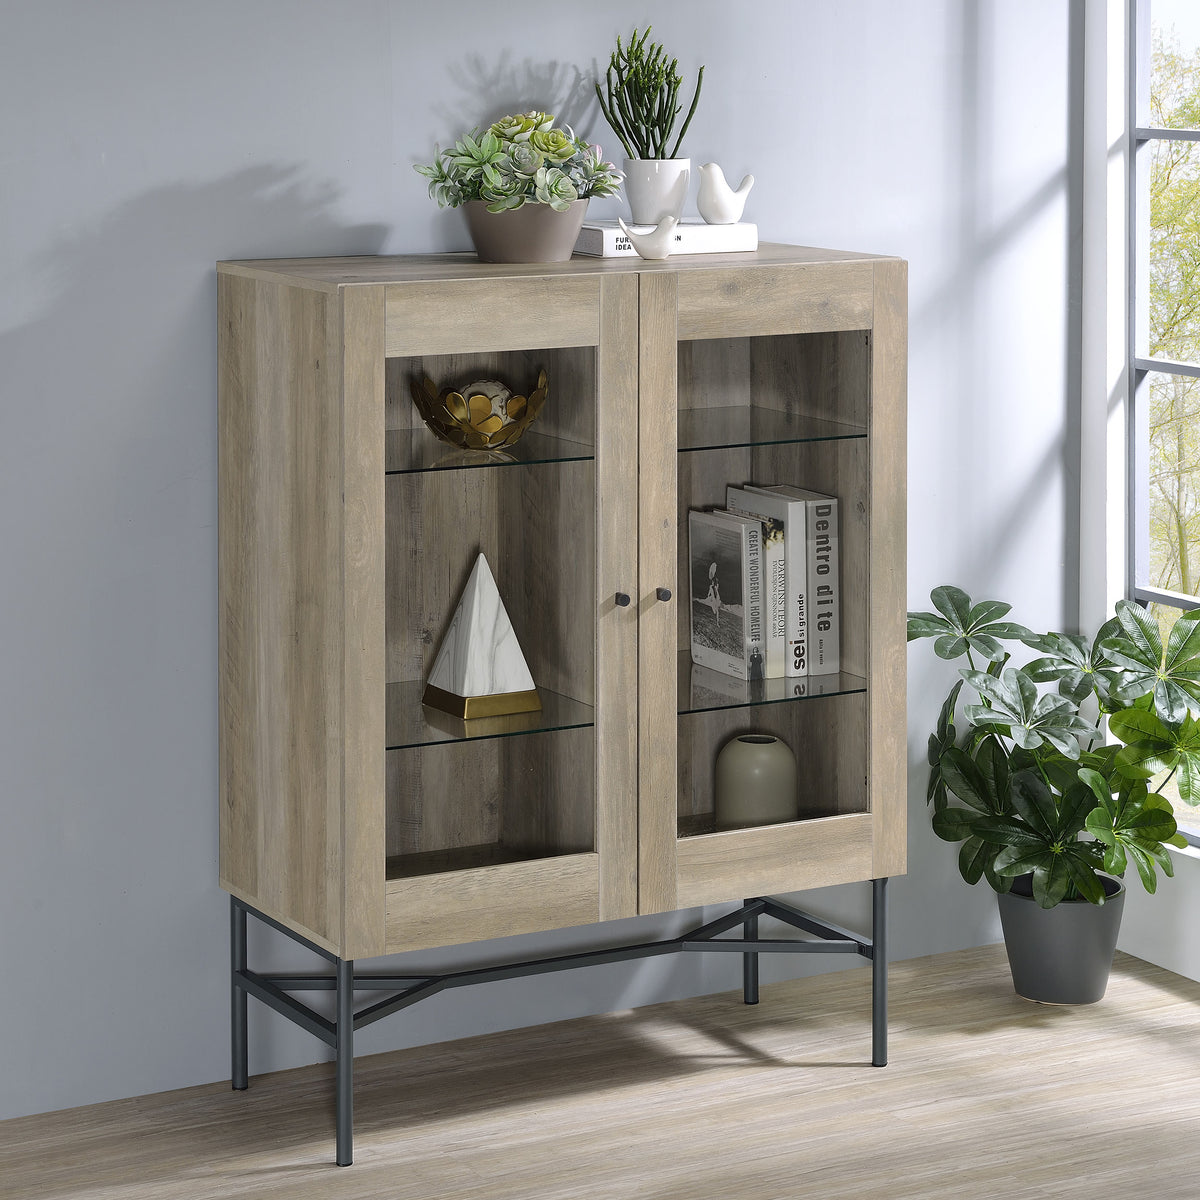 Bonilla 2-door Accent Cabinet with Glass Shelves Bonilla 2-door Accent Cabinet with Glass Shelves Half Price Furniture